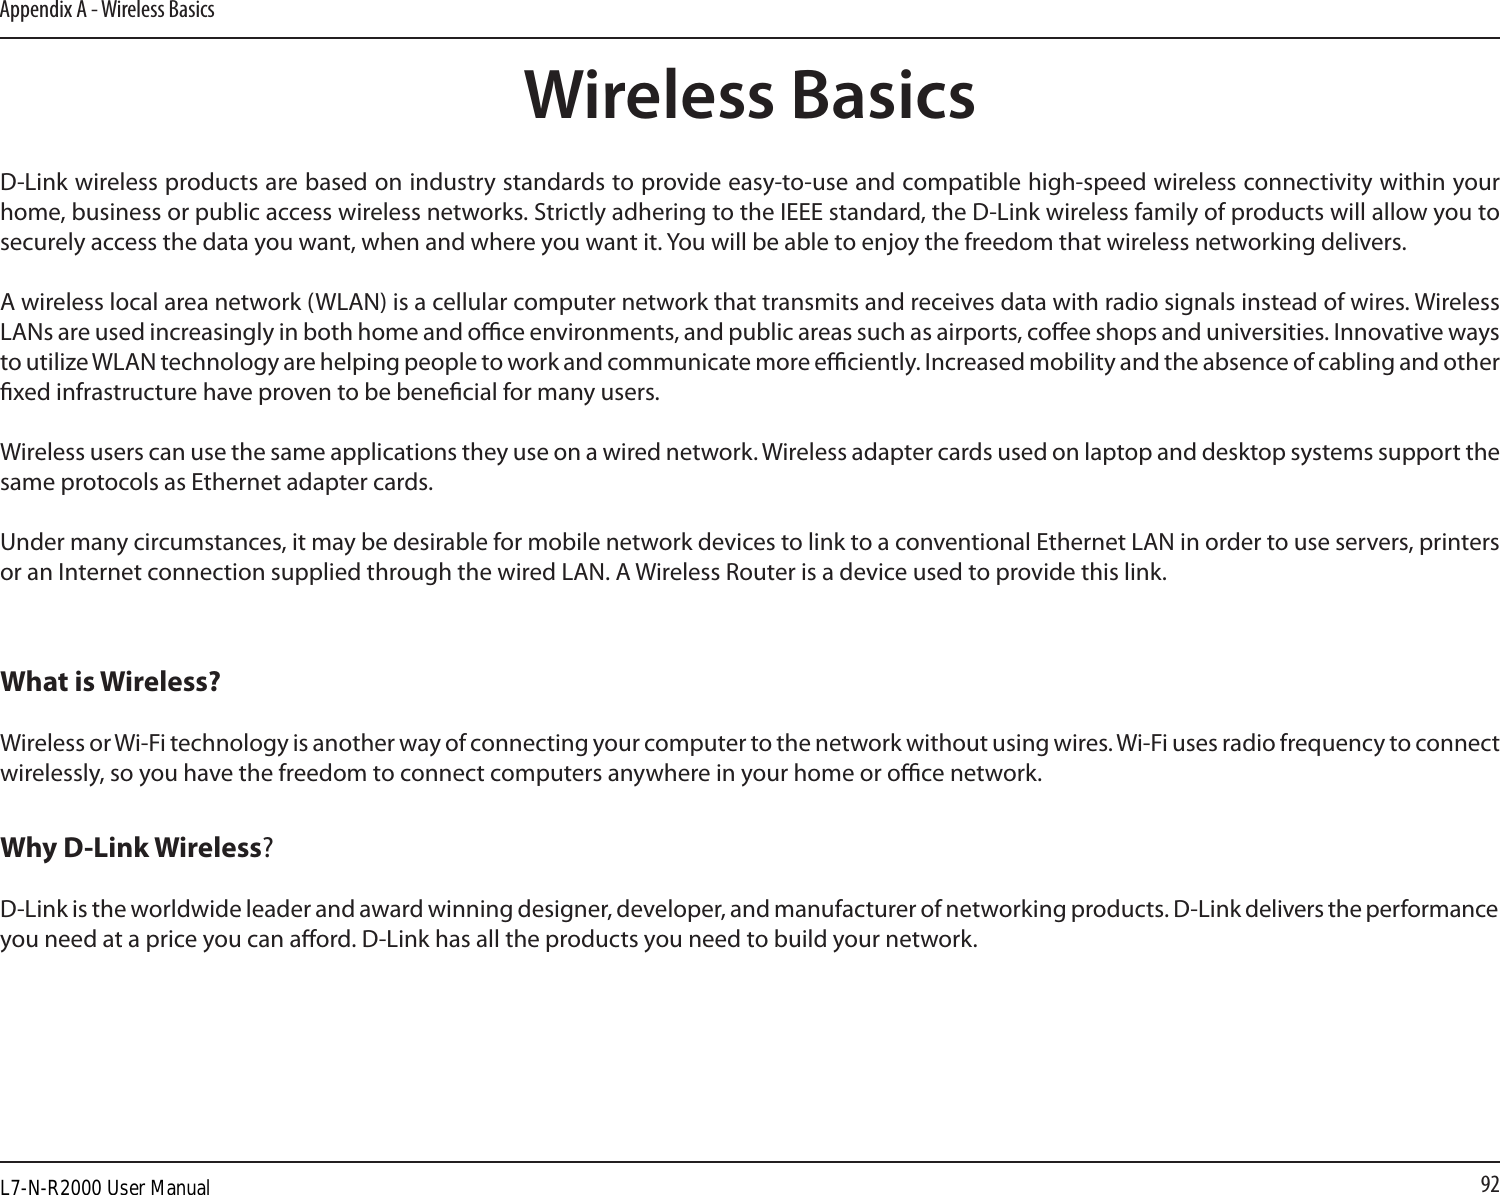 92Appendix A - Wireless BasicsD-Link wireless products are based on industry standards to provide easy-to-use and compatible high-speed wireless connectivity within your home, business or public access wireless networks. Strictly adhering to the IEEE standard, the D-Link wireless family of products will allow you to securely access the data you want, when and where you want it. You will be able to enjoy the freedom that wireless networking delivers.A wireless local area network (WLAN) is a cellular computer network that transmits and receives data with radio signals instead of wires. Wireless LANs are used increasingly in both home and oce environments, and public areas such as airports, coee shops and universities. Innovative ways to utilize WLAN technology are helping people to work and communicate more eciently. Increased mobility and the absence of cabling and other xed infrastructure have proven to be benecial for many users. Wireless users can use the same applications they use on a wired network. Wireless adapter cards used on laptop and desktop systems support the same protocols as Ethernet adapter cards. Under many circumstances, it may be desirable for mobile network devices to link to a conventional Ethernet LAN in order to use servers, printers or an Internet connection supplied through the wired LAN. A Wireless Router is a device used to provide this link.Wireless BasicsWhat is Wireless?Wireless or Wi-Fi technology is another way of connecting your computer to the network without using wires. Wi-Fi uses radio frequency to connect wirelessly, so you have the freedom to connect computers anywhere in your home or oce network.Why D-Link Wireless?  D-Link is the worldwide leader and award winning designer, developer, and manufacturer of networking products. D-Link delivers the performance you need at a price you can aord. D-Link has all the products you need to build your network.L7-N-R2000 User Manual